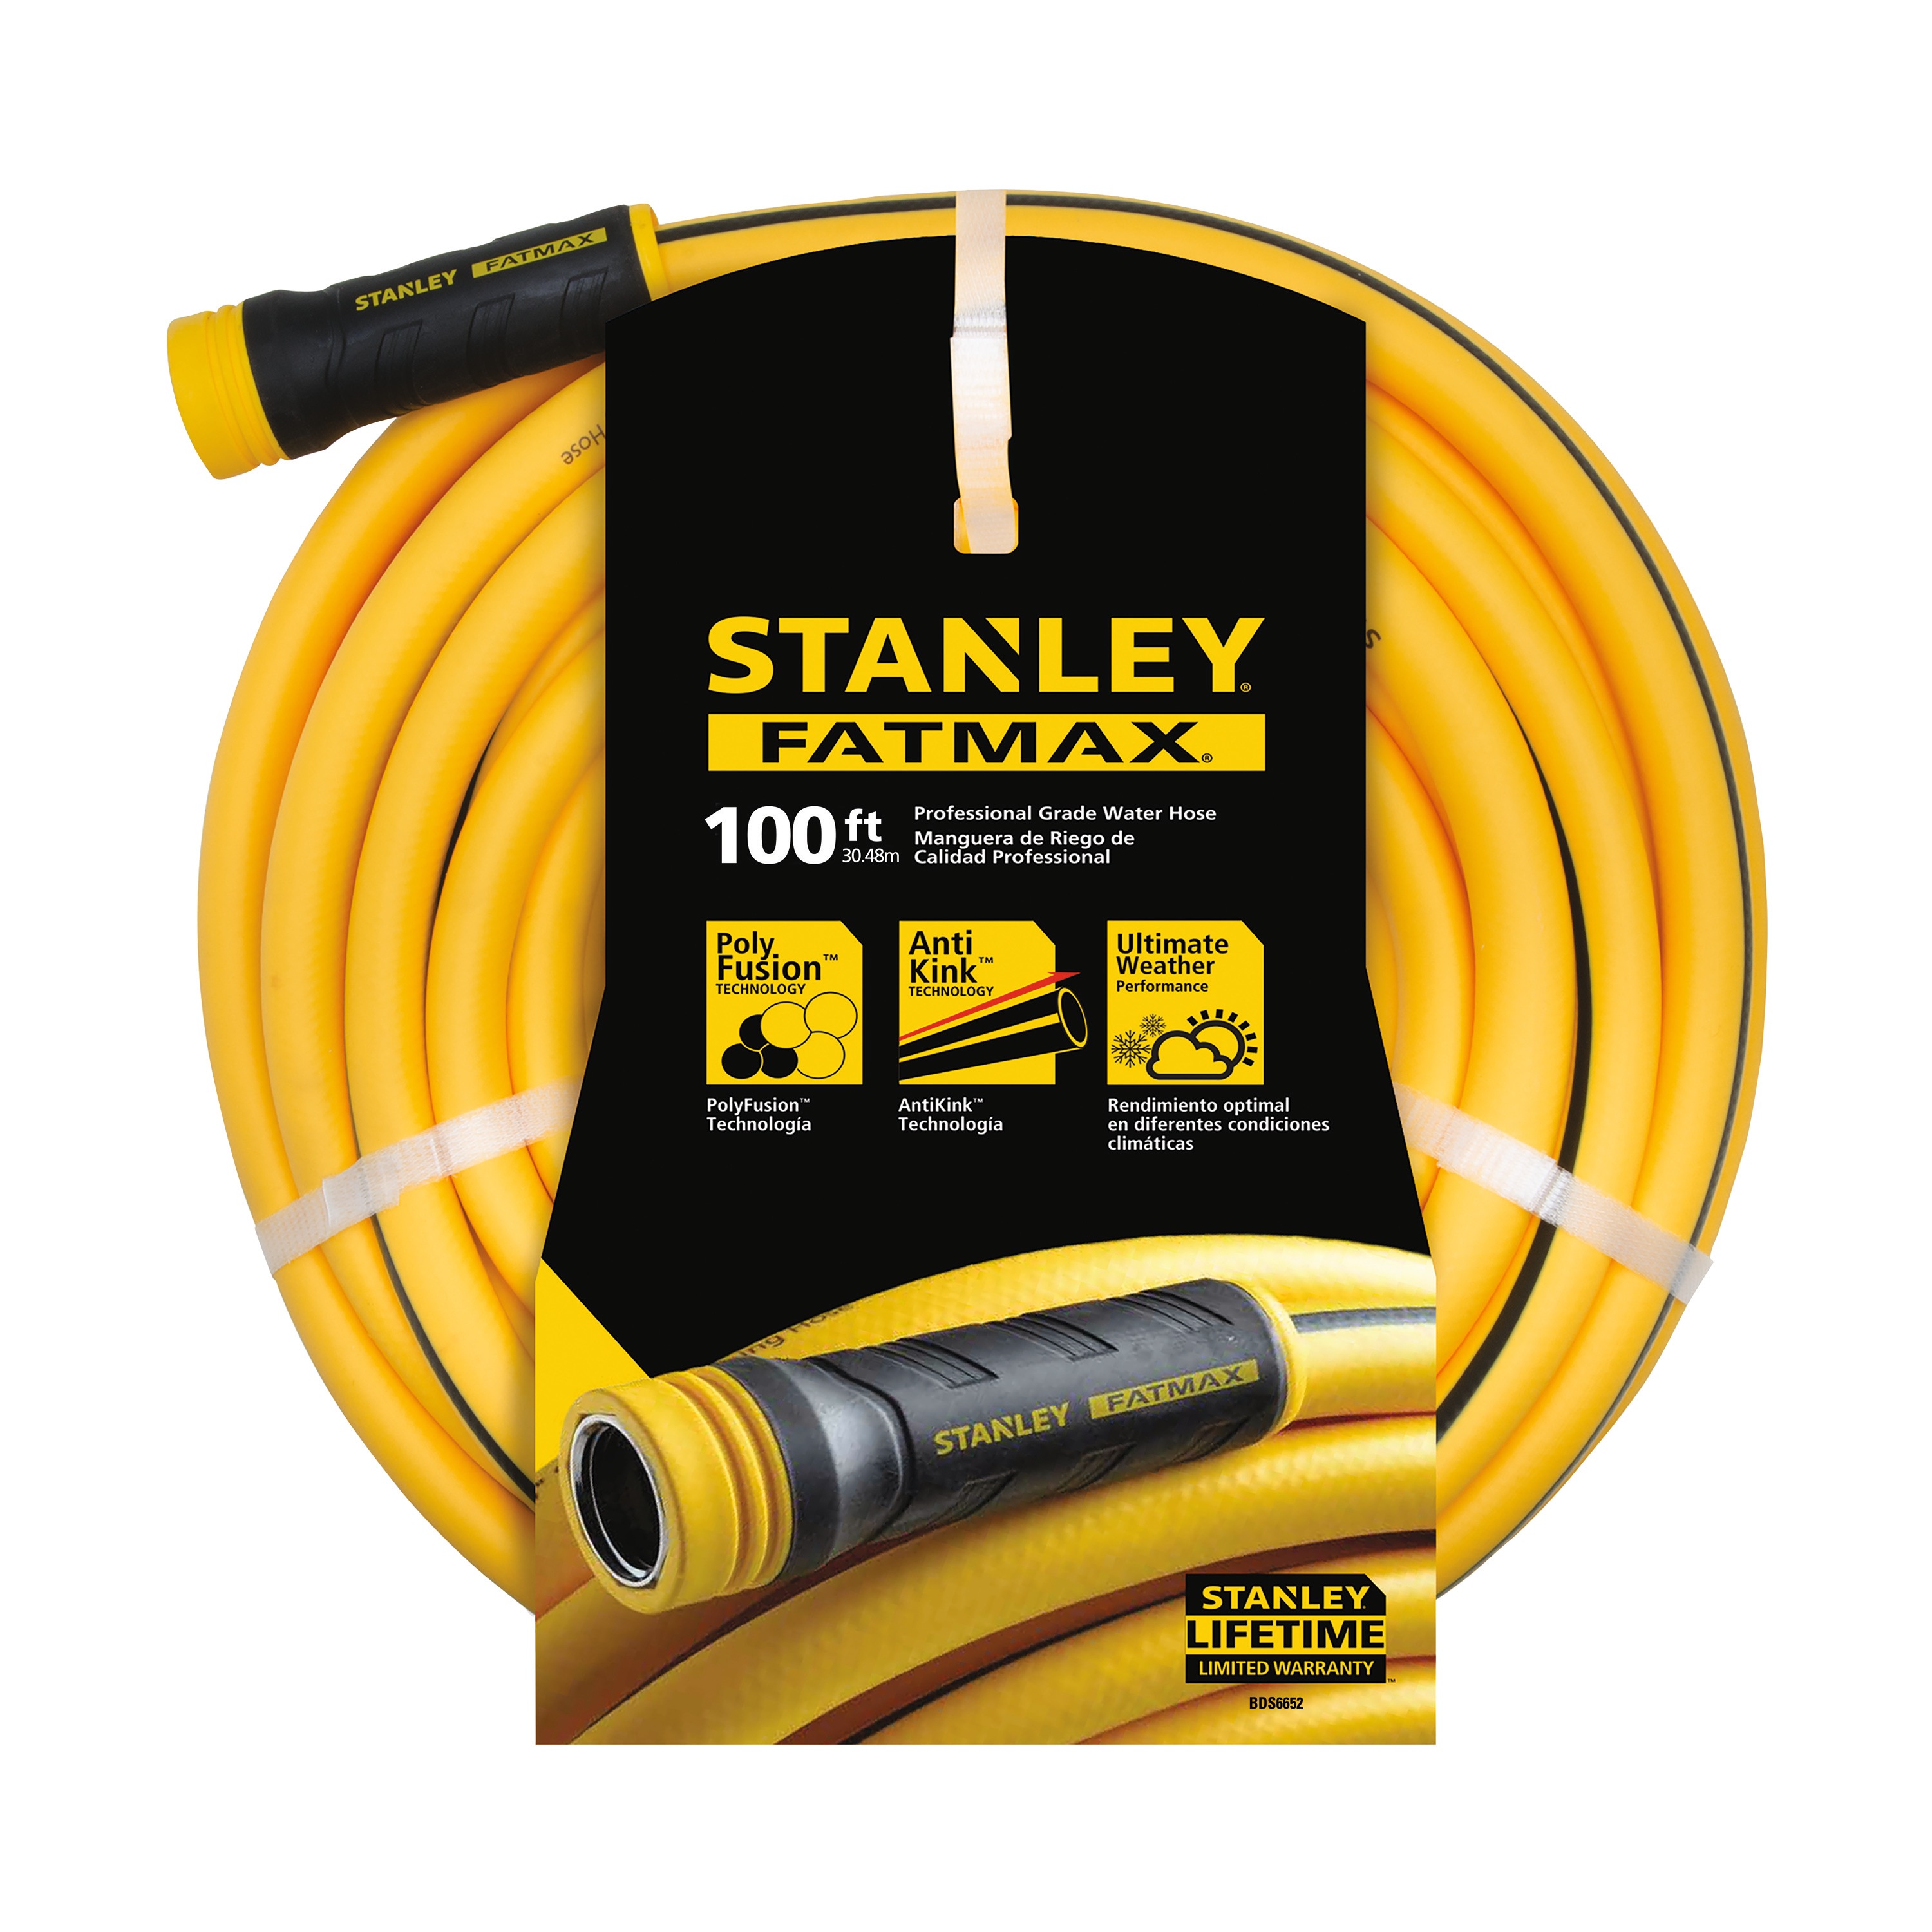 Fatmax 100 Ft Professional Grade Water Hose Bds6652 Stanley Tools